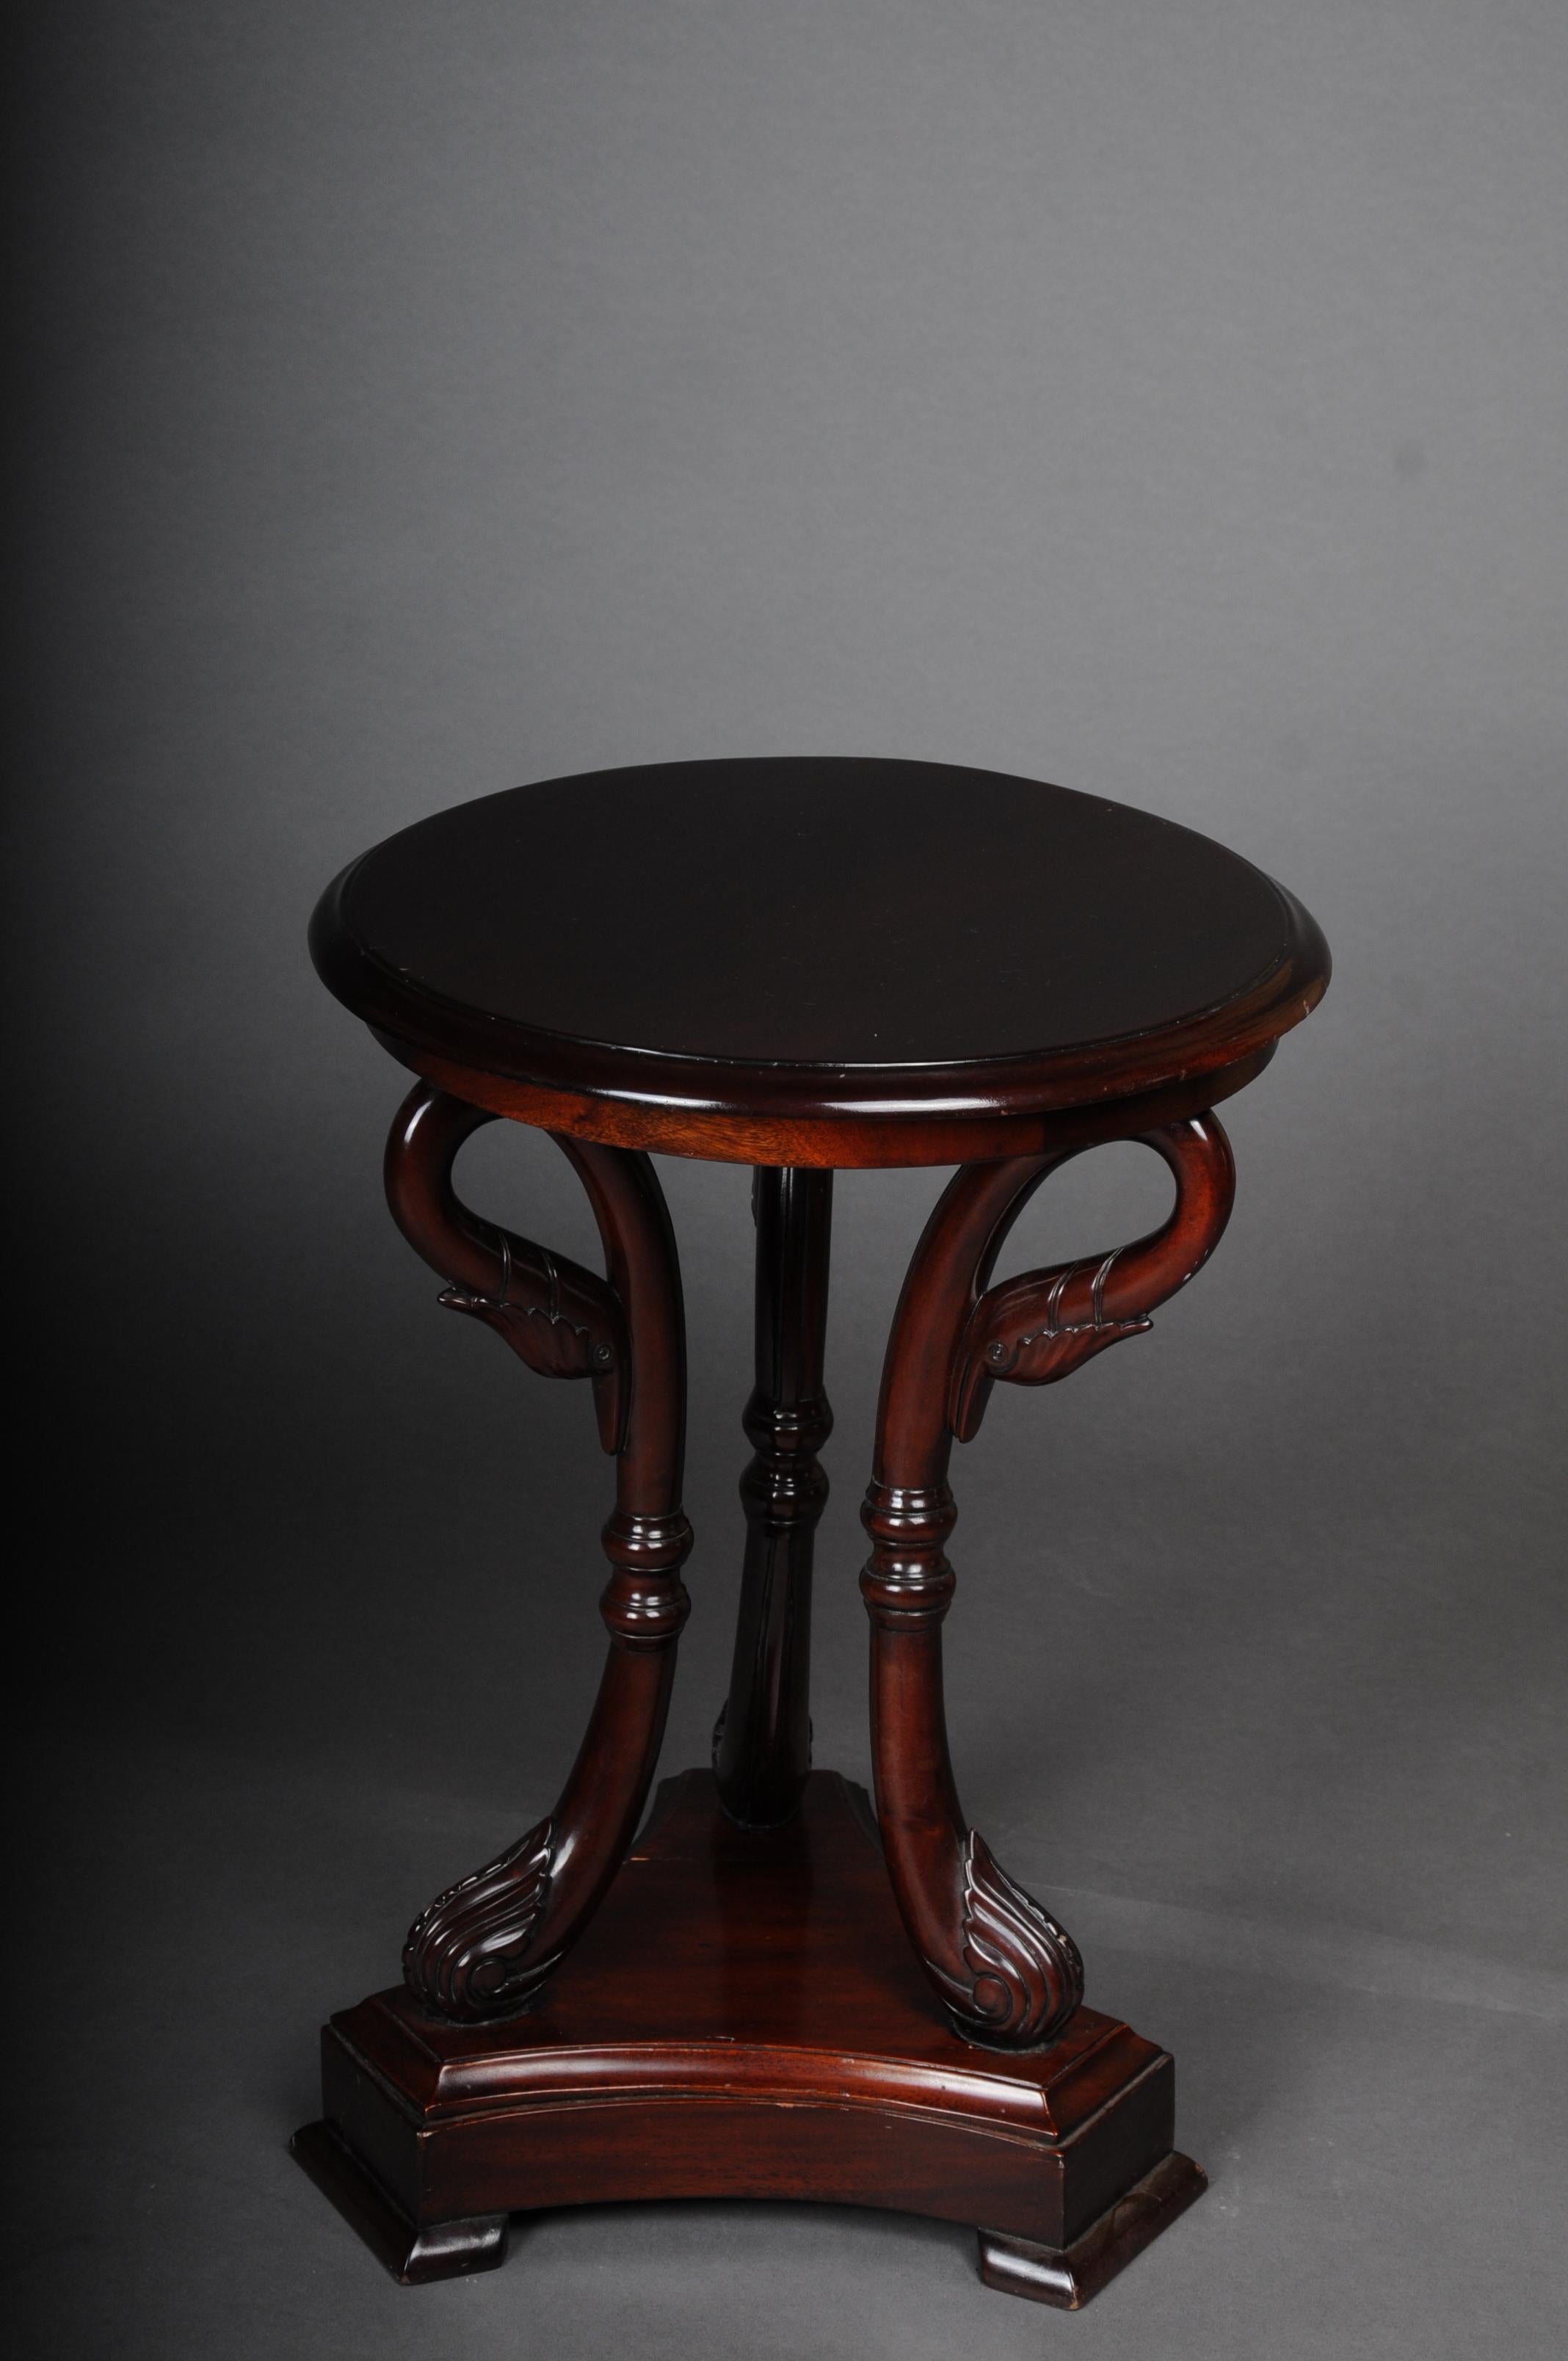 Swan side table, mahogany, 20th century

Round profiled tabletop.
Solid wood with long swan legs on a molded square base.

(G-96).